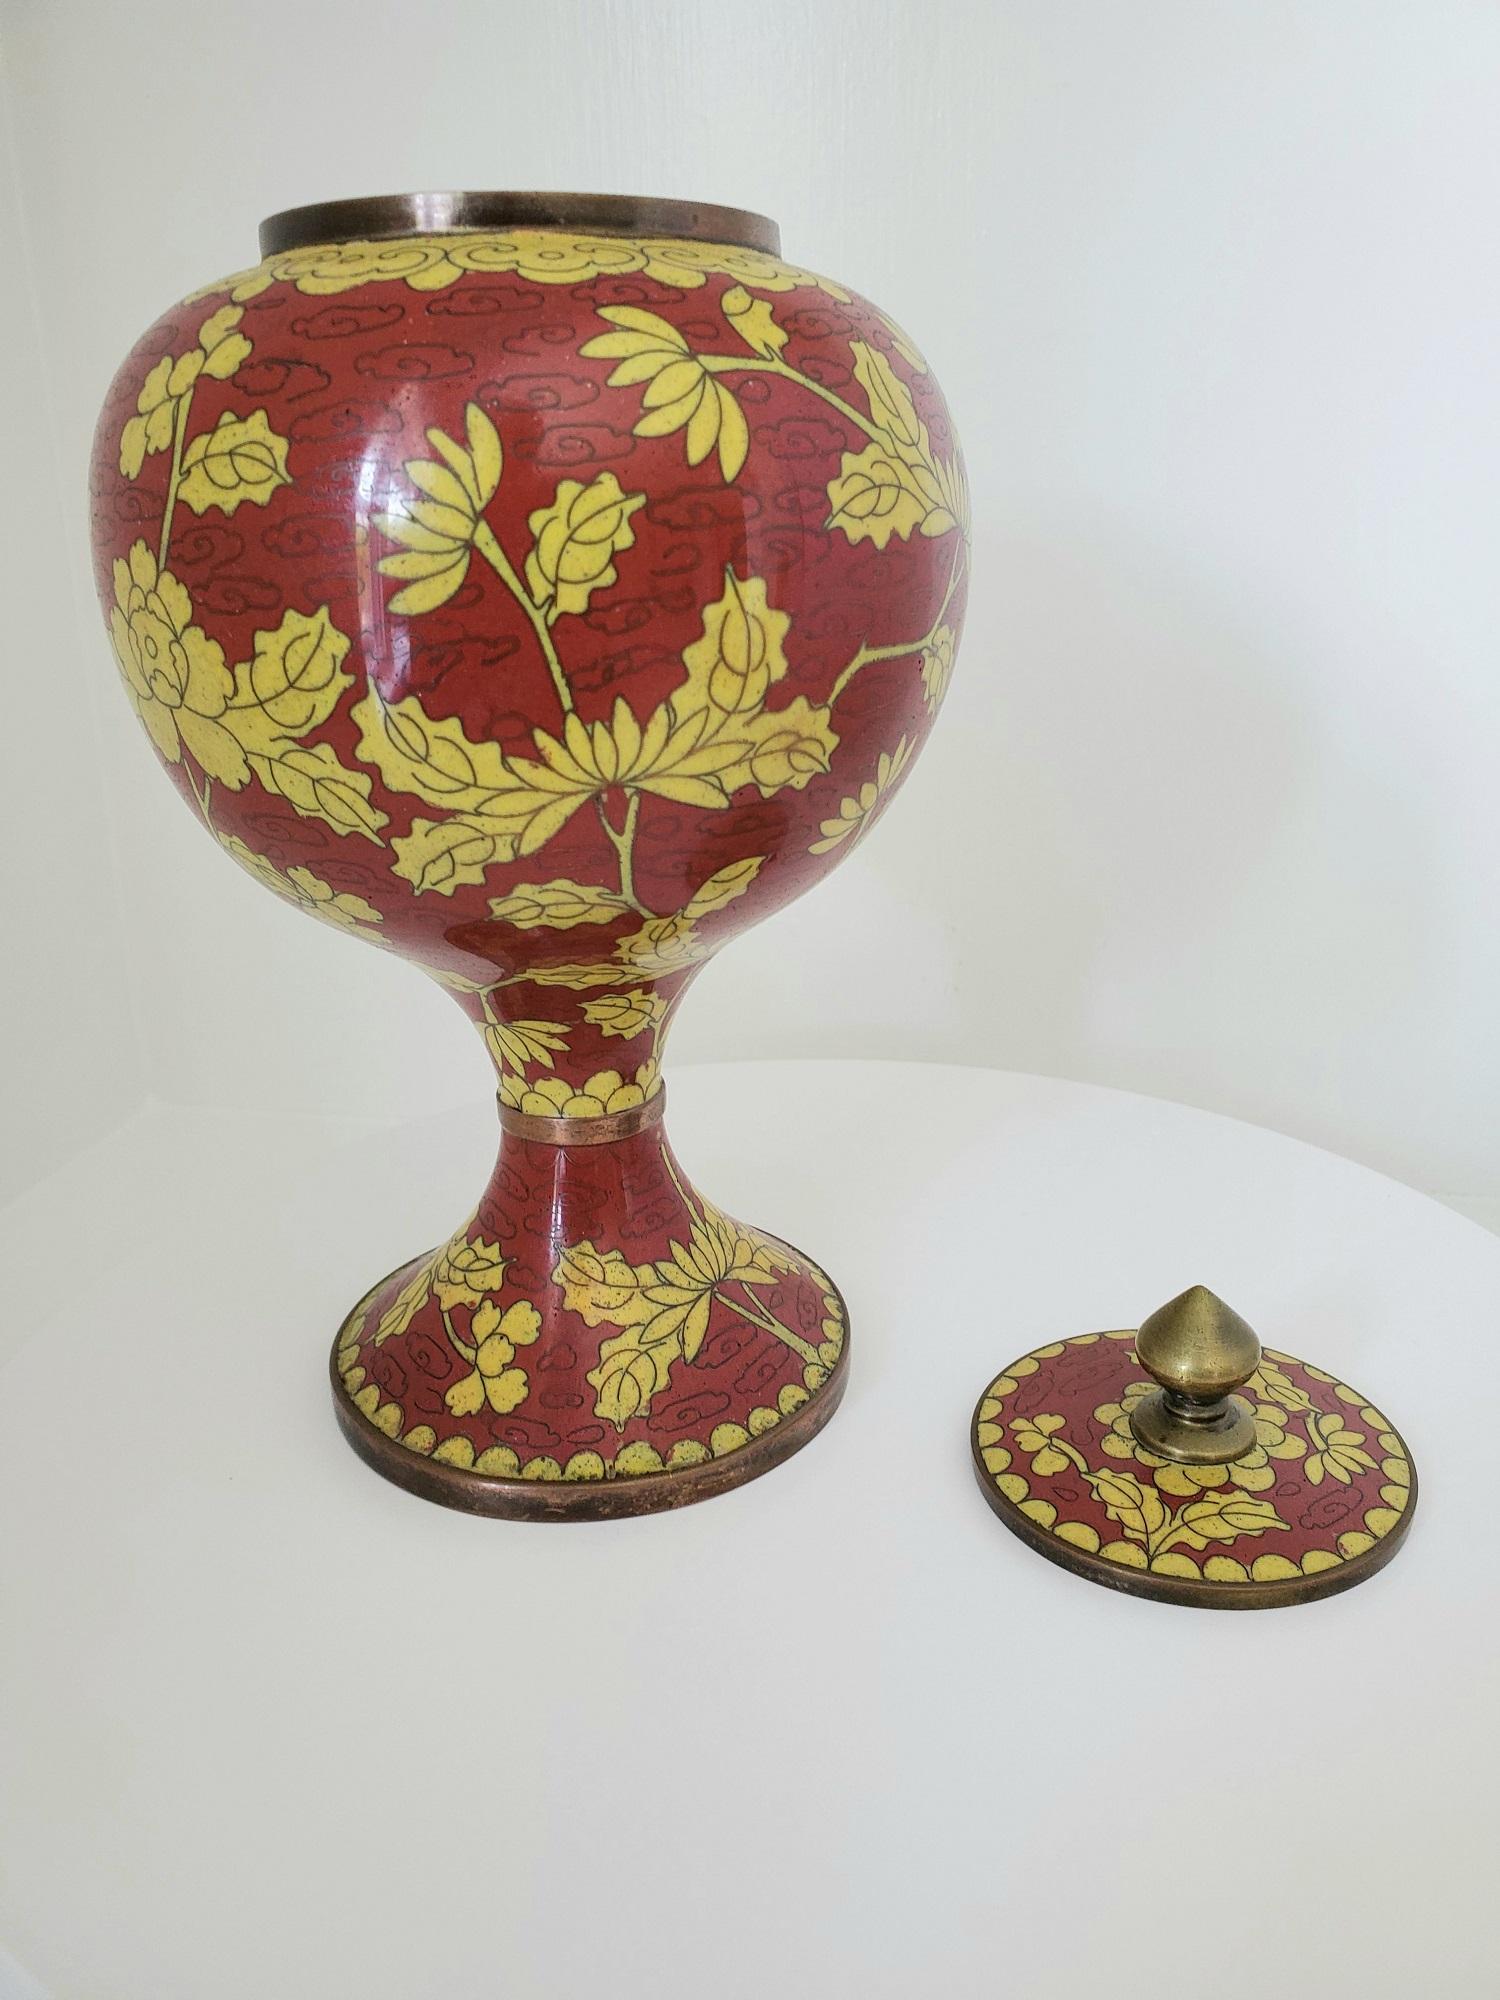 Hand-Crafted 19th Century Chinese Cloisonné Urn or Lidded Vase Red with Yellow Floral Motif